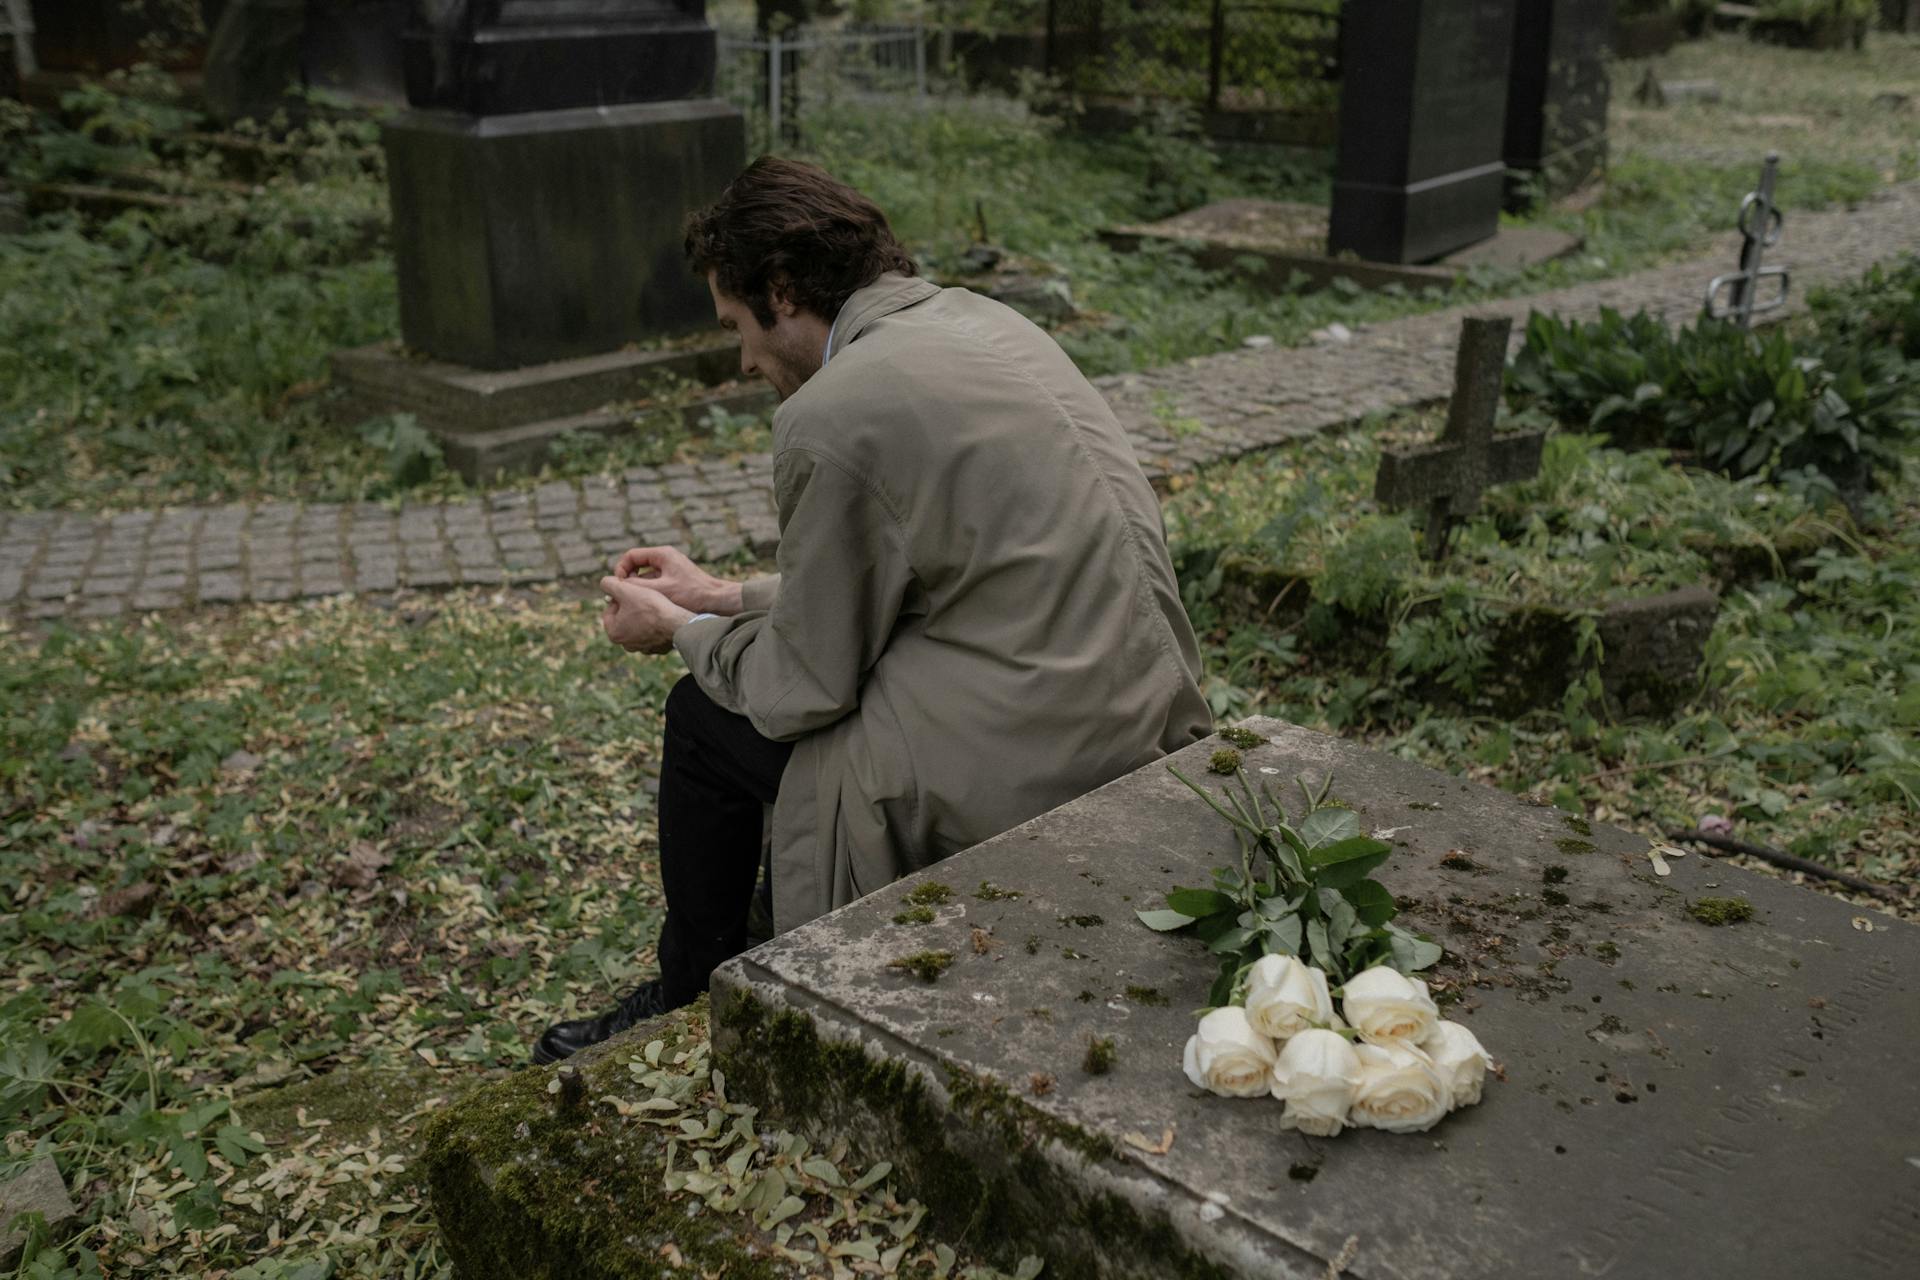 A man sitting by a grave | Source: Pexels